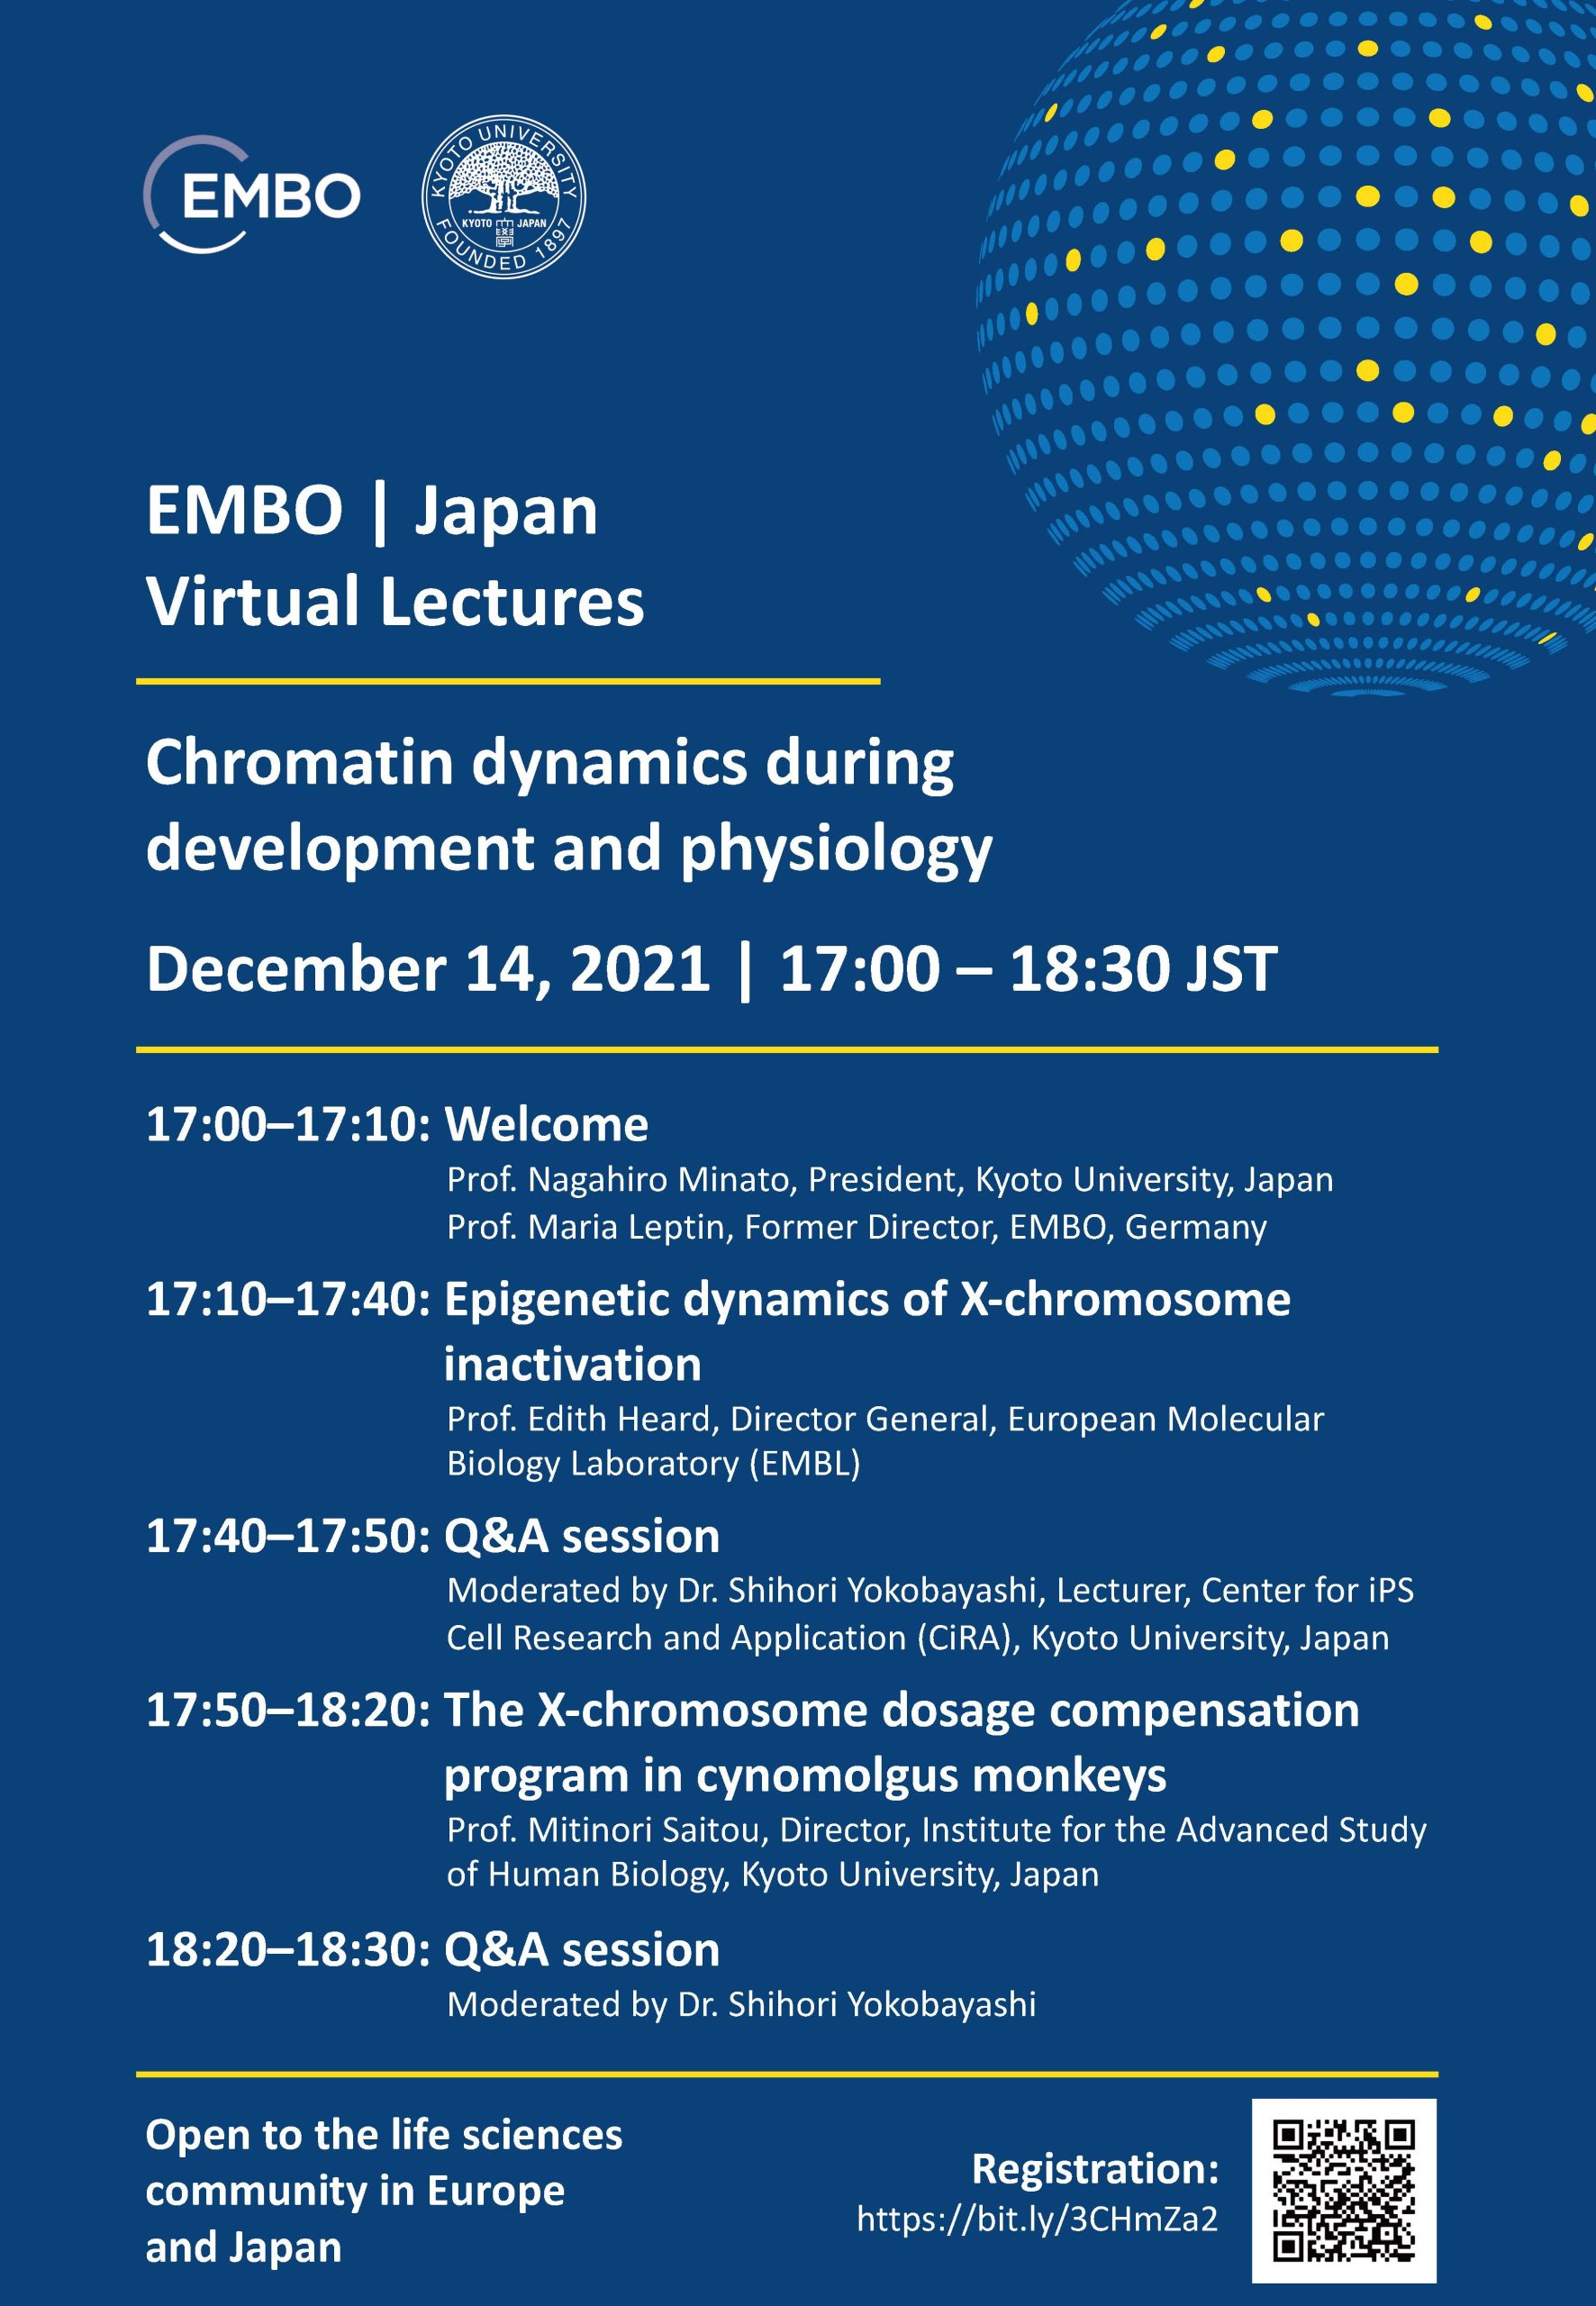 EMBO | Japan Virtual Lectures